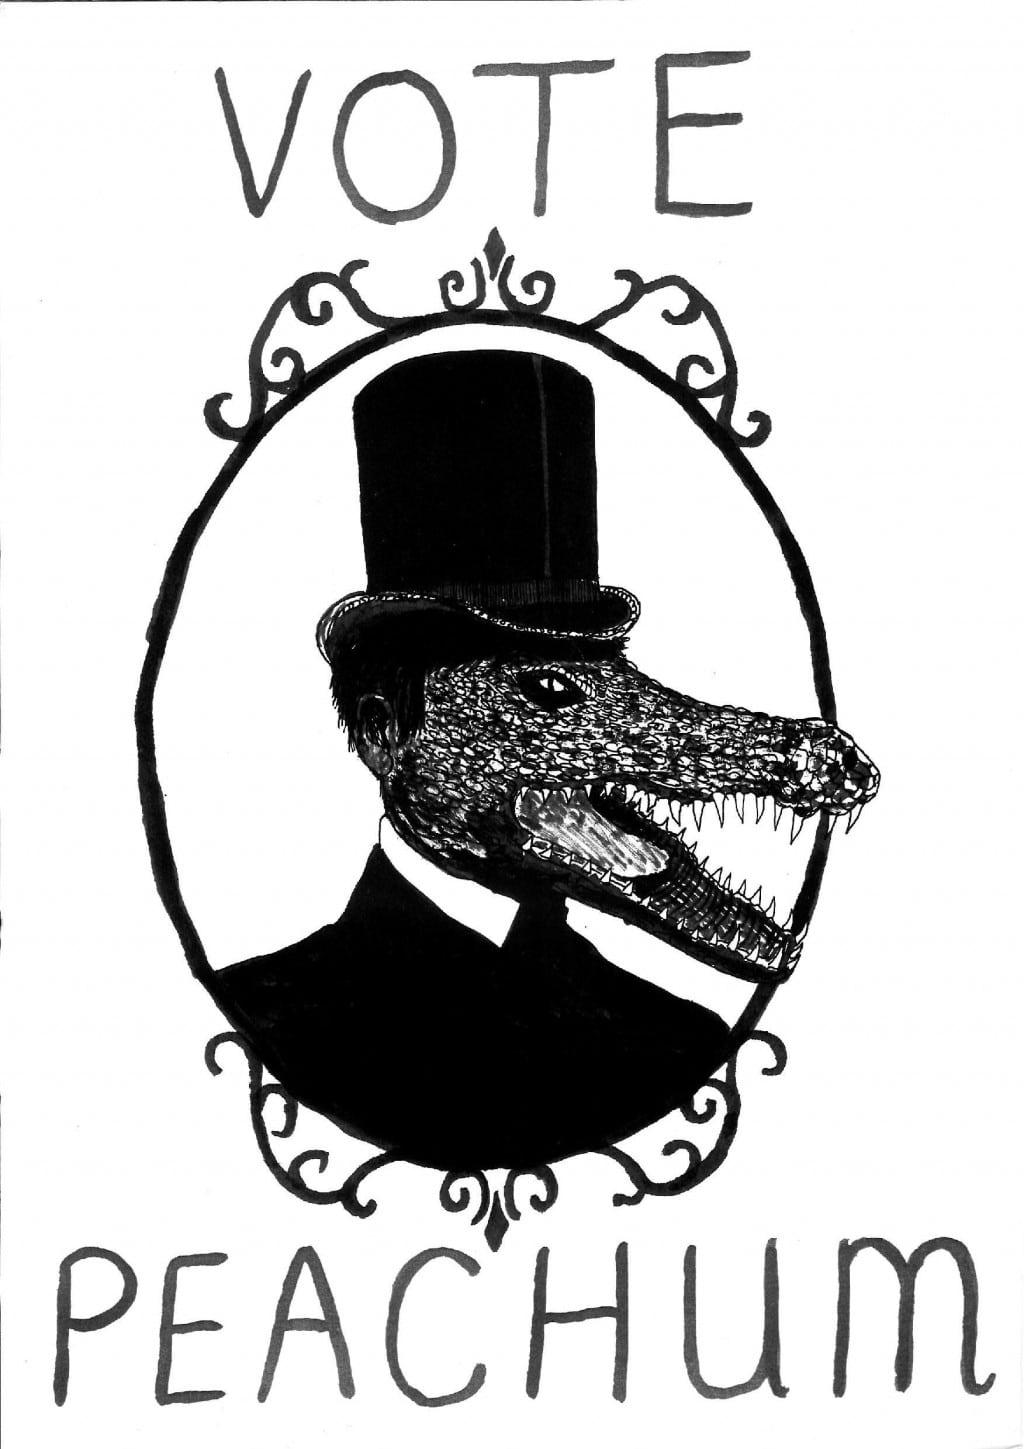 Fly poster for Dead Dog in a Suitcase. Black and white image. In the centre there is a Victorian style silhouette drawn in black ink depicting the head of a crocodile with a wide open mouth and lots of sharp teeth, wearing a smart top hat and suit jacket. Contained within an ornate, oval frame drawn in black ink. Above and below the figure are the words 'Vote Peachum', written in black ink, in a hand written style.